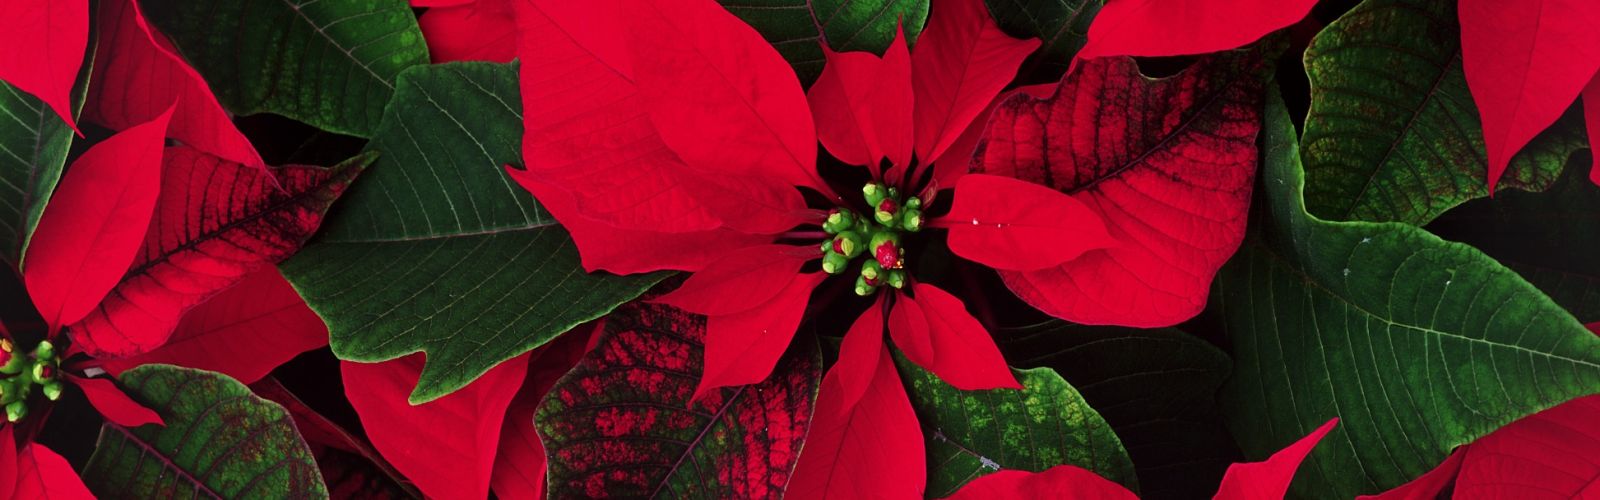 close up of red poinsettias